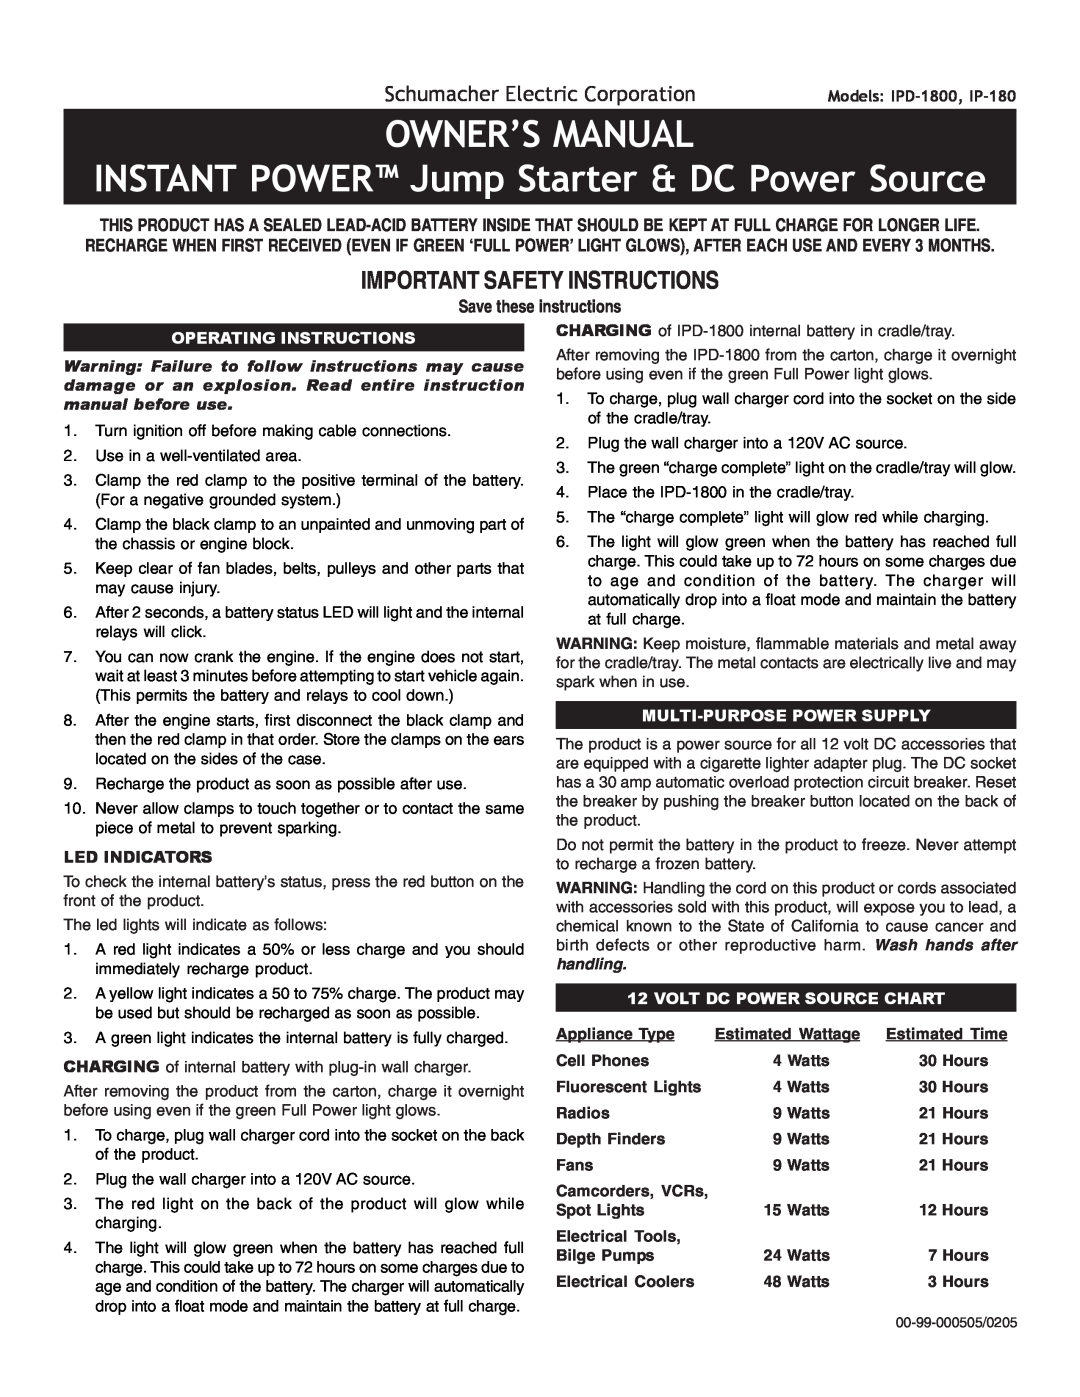 Schumacher 94026831, IP-180 owner manual Operating Instructions, Multi-Purpose Power Supply, Volt Dc Power Source Chart 